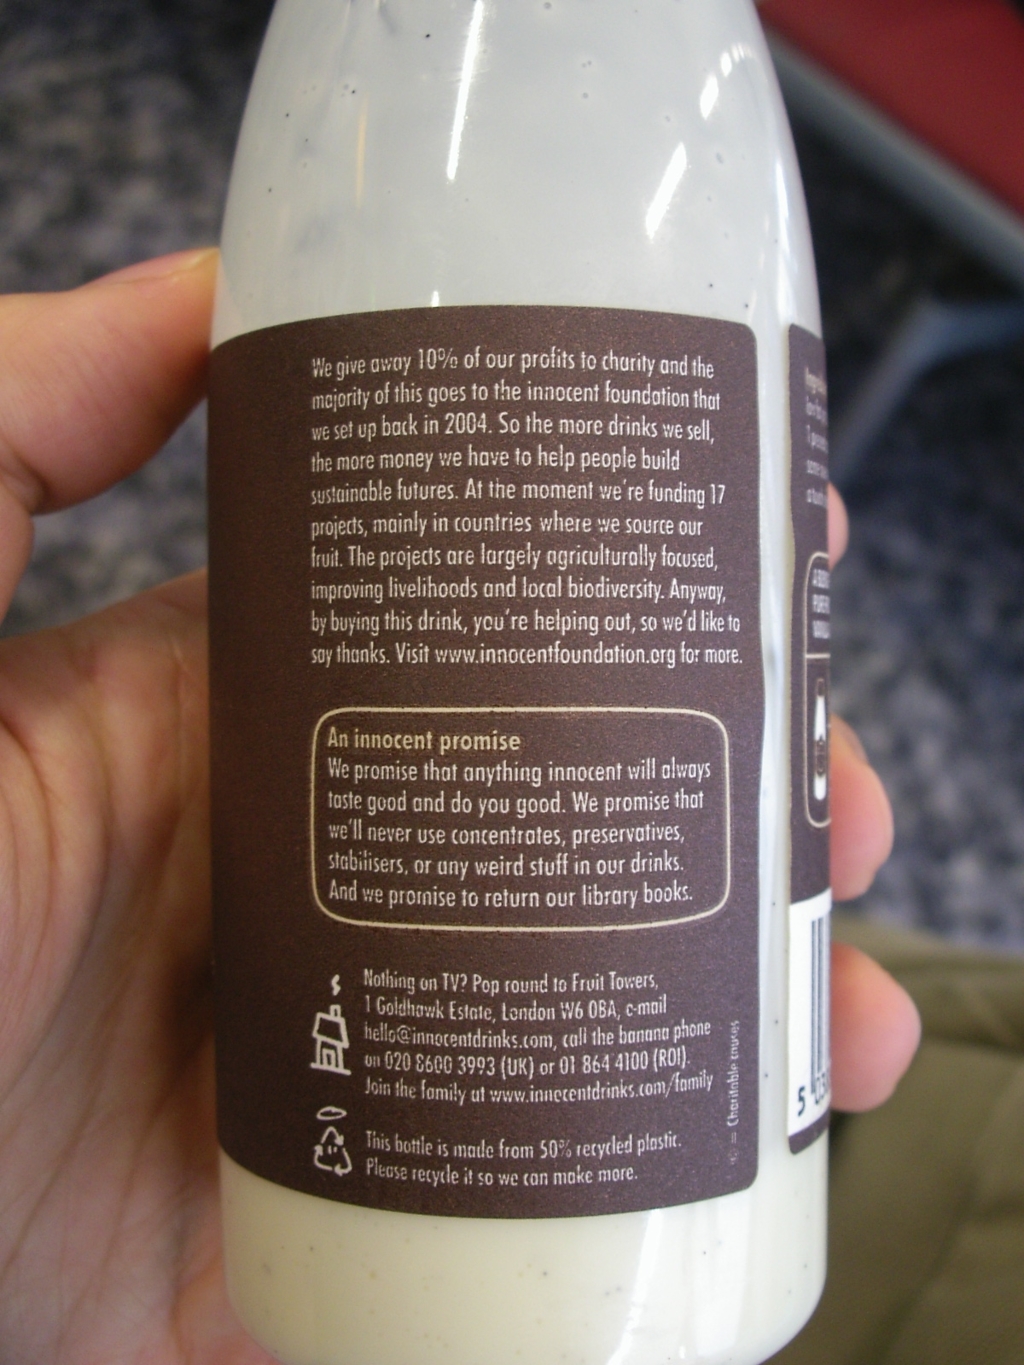 Smoothie Label from Innocent Drinks